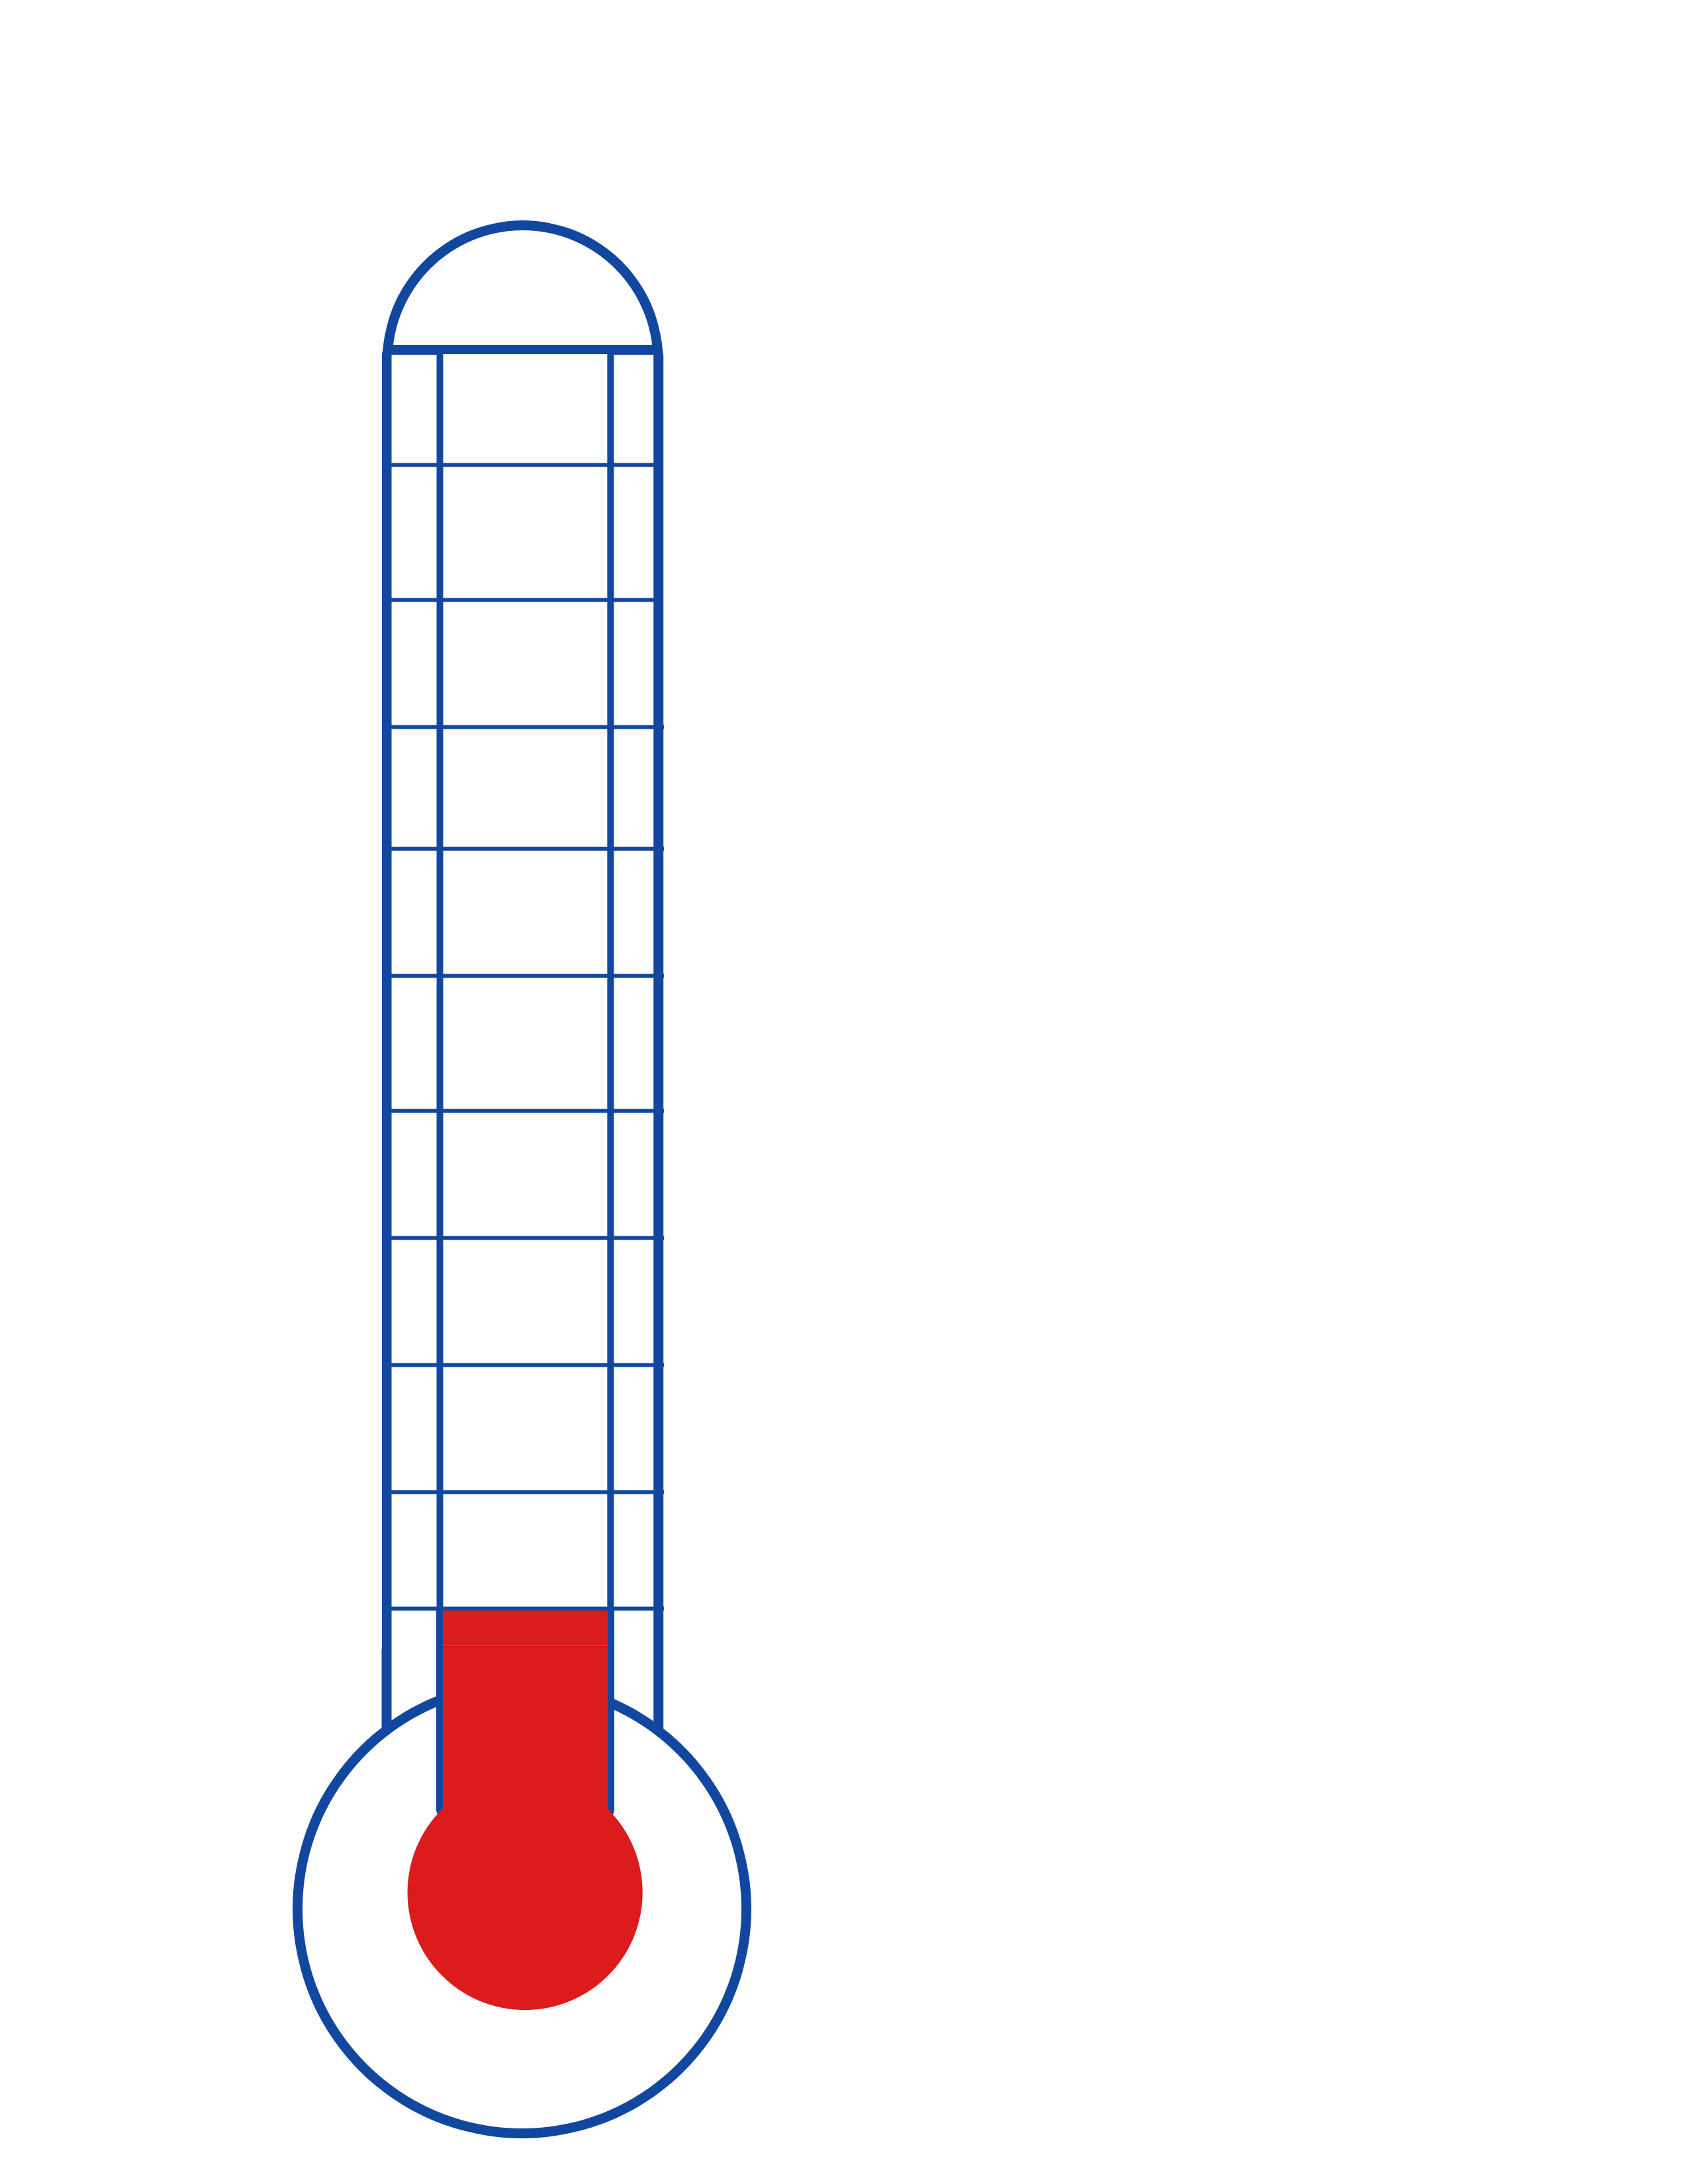 Printable Fundraising Thermometer